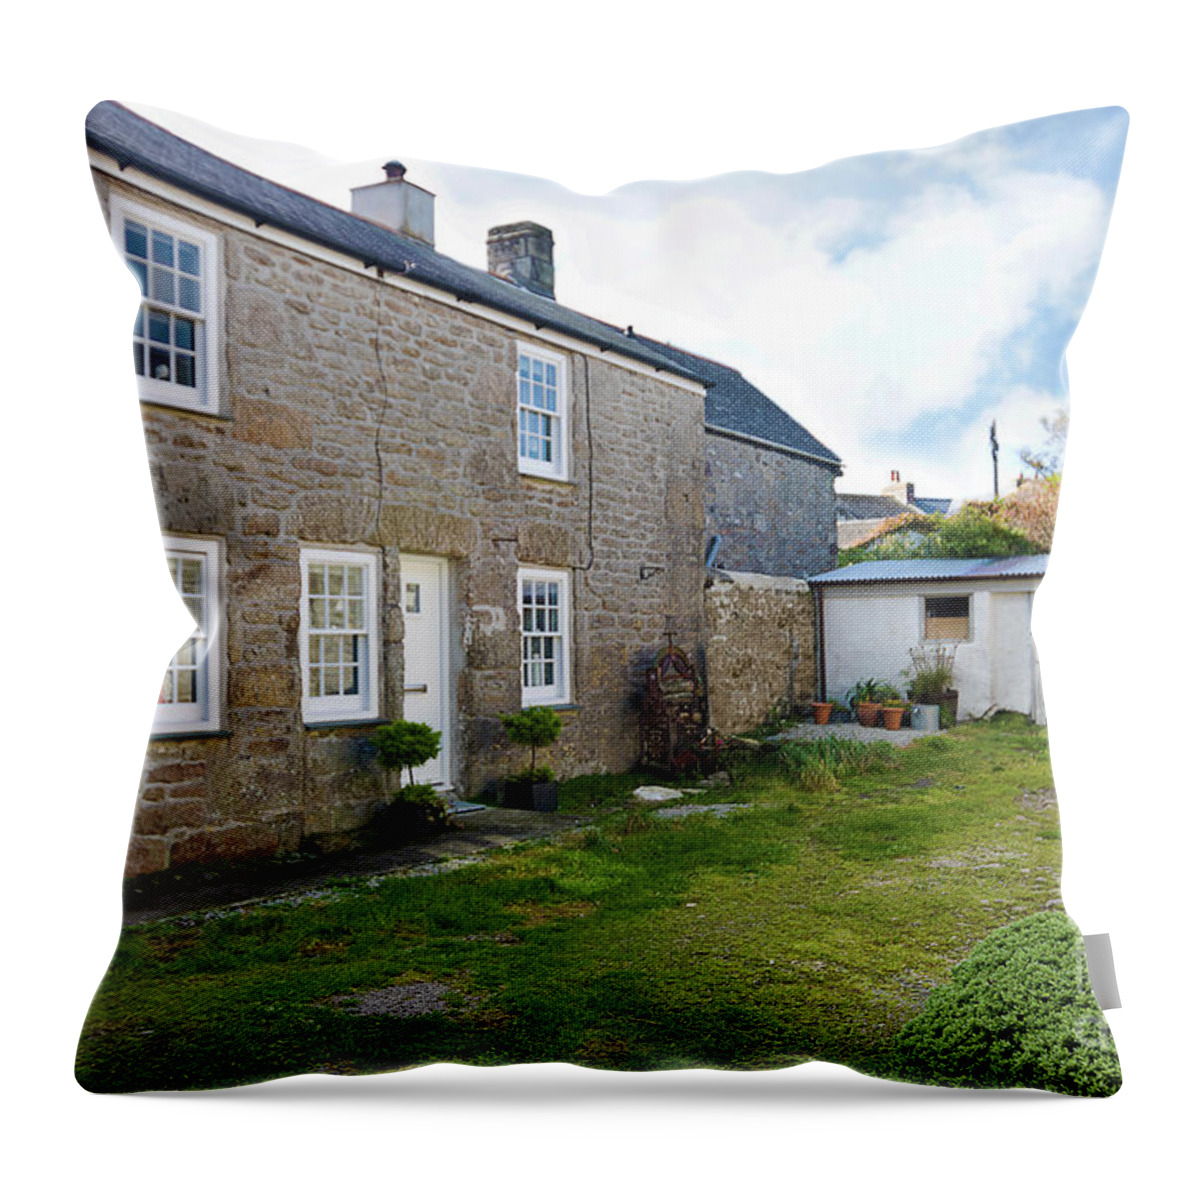 Cottages Throw Pillow featuring the photograph Tinner's Courtyard St Just Cornwall by Terri Waters